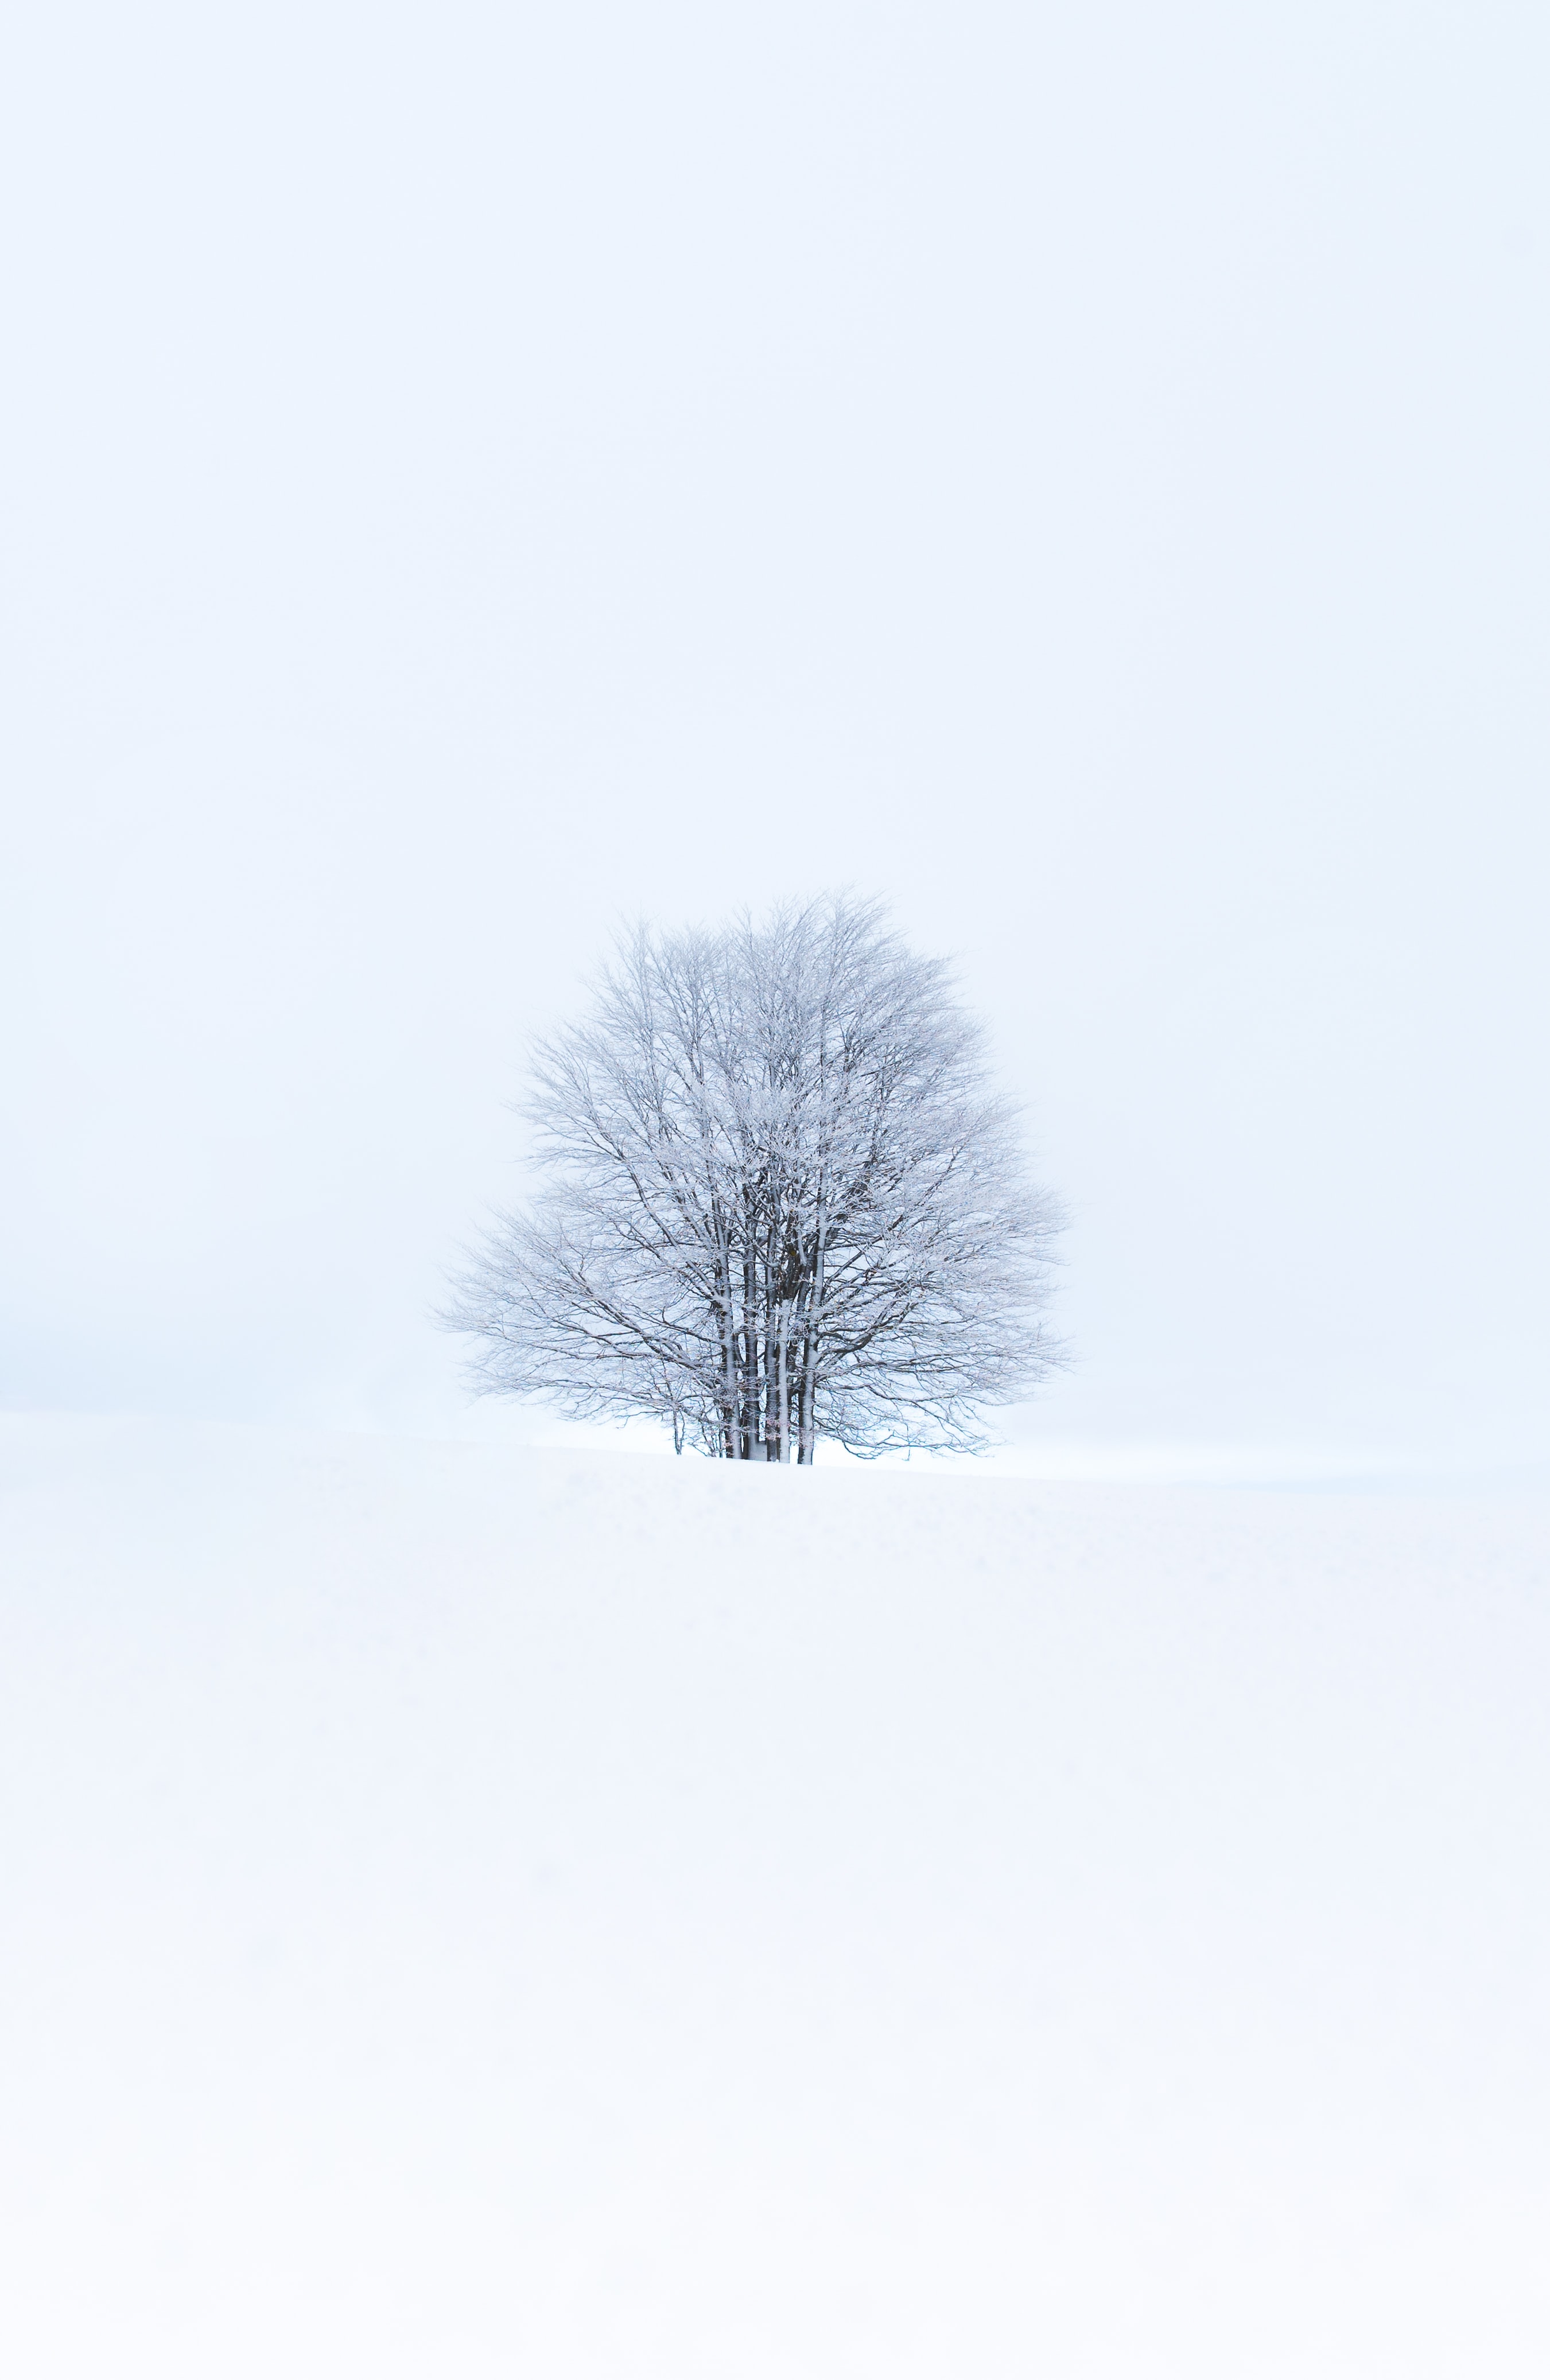 winter, nature, snow, white, wood, tree, minimalism wallpaper for mobile